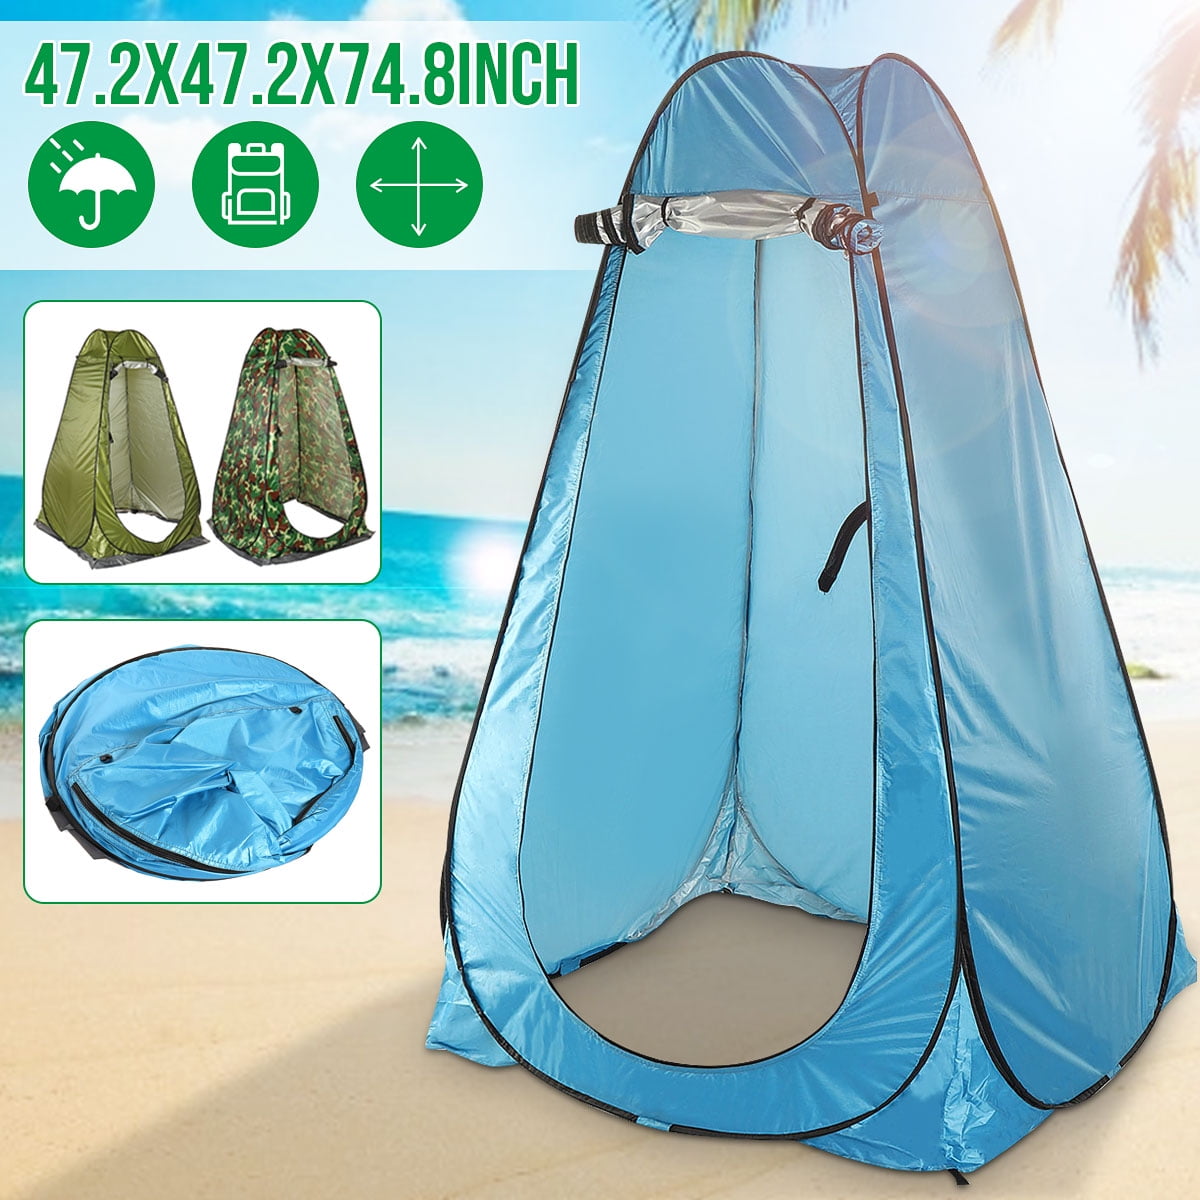 Outdoor Portable Instant Pop Up Tent Camping Shower Toilet Privacy Changing Room 